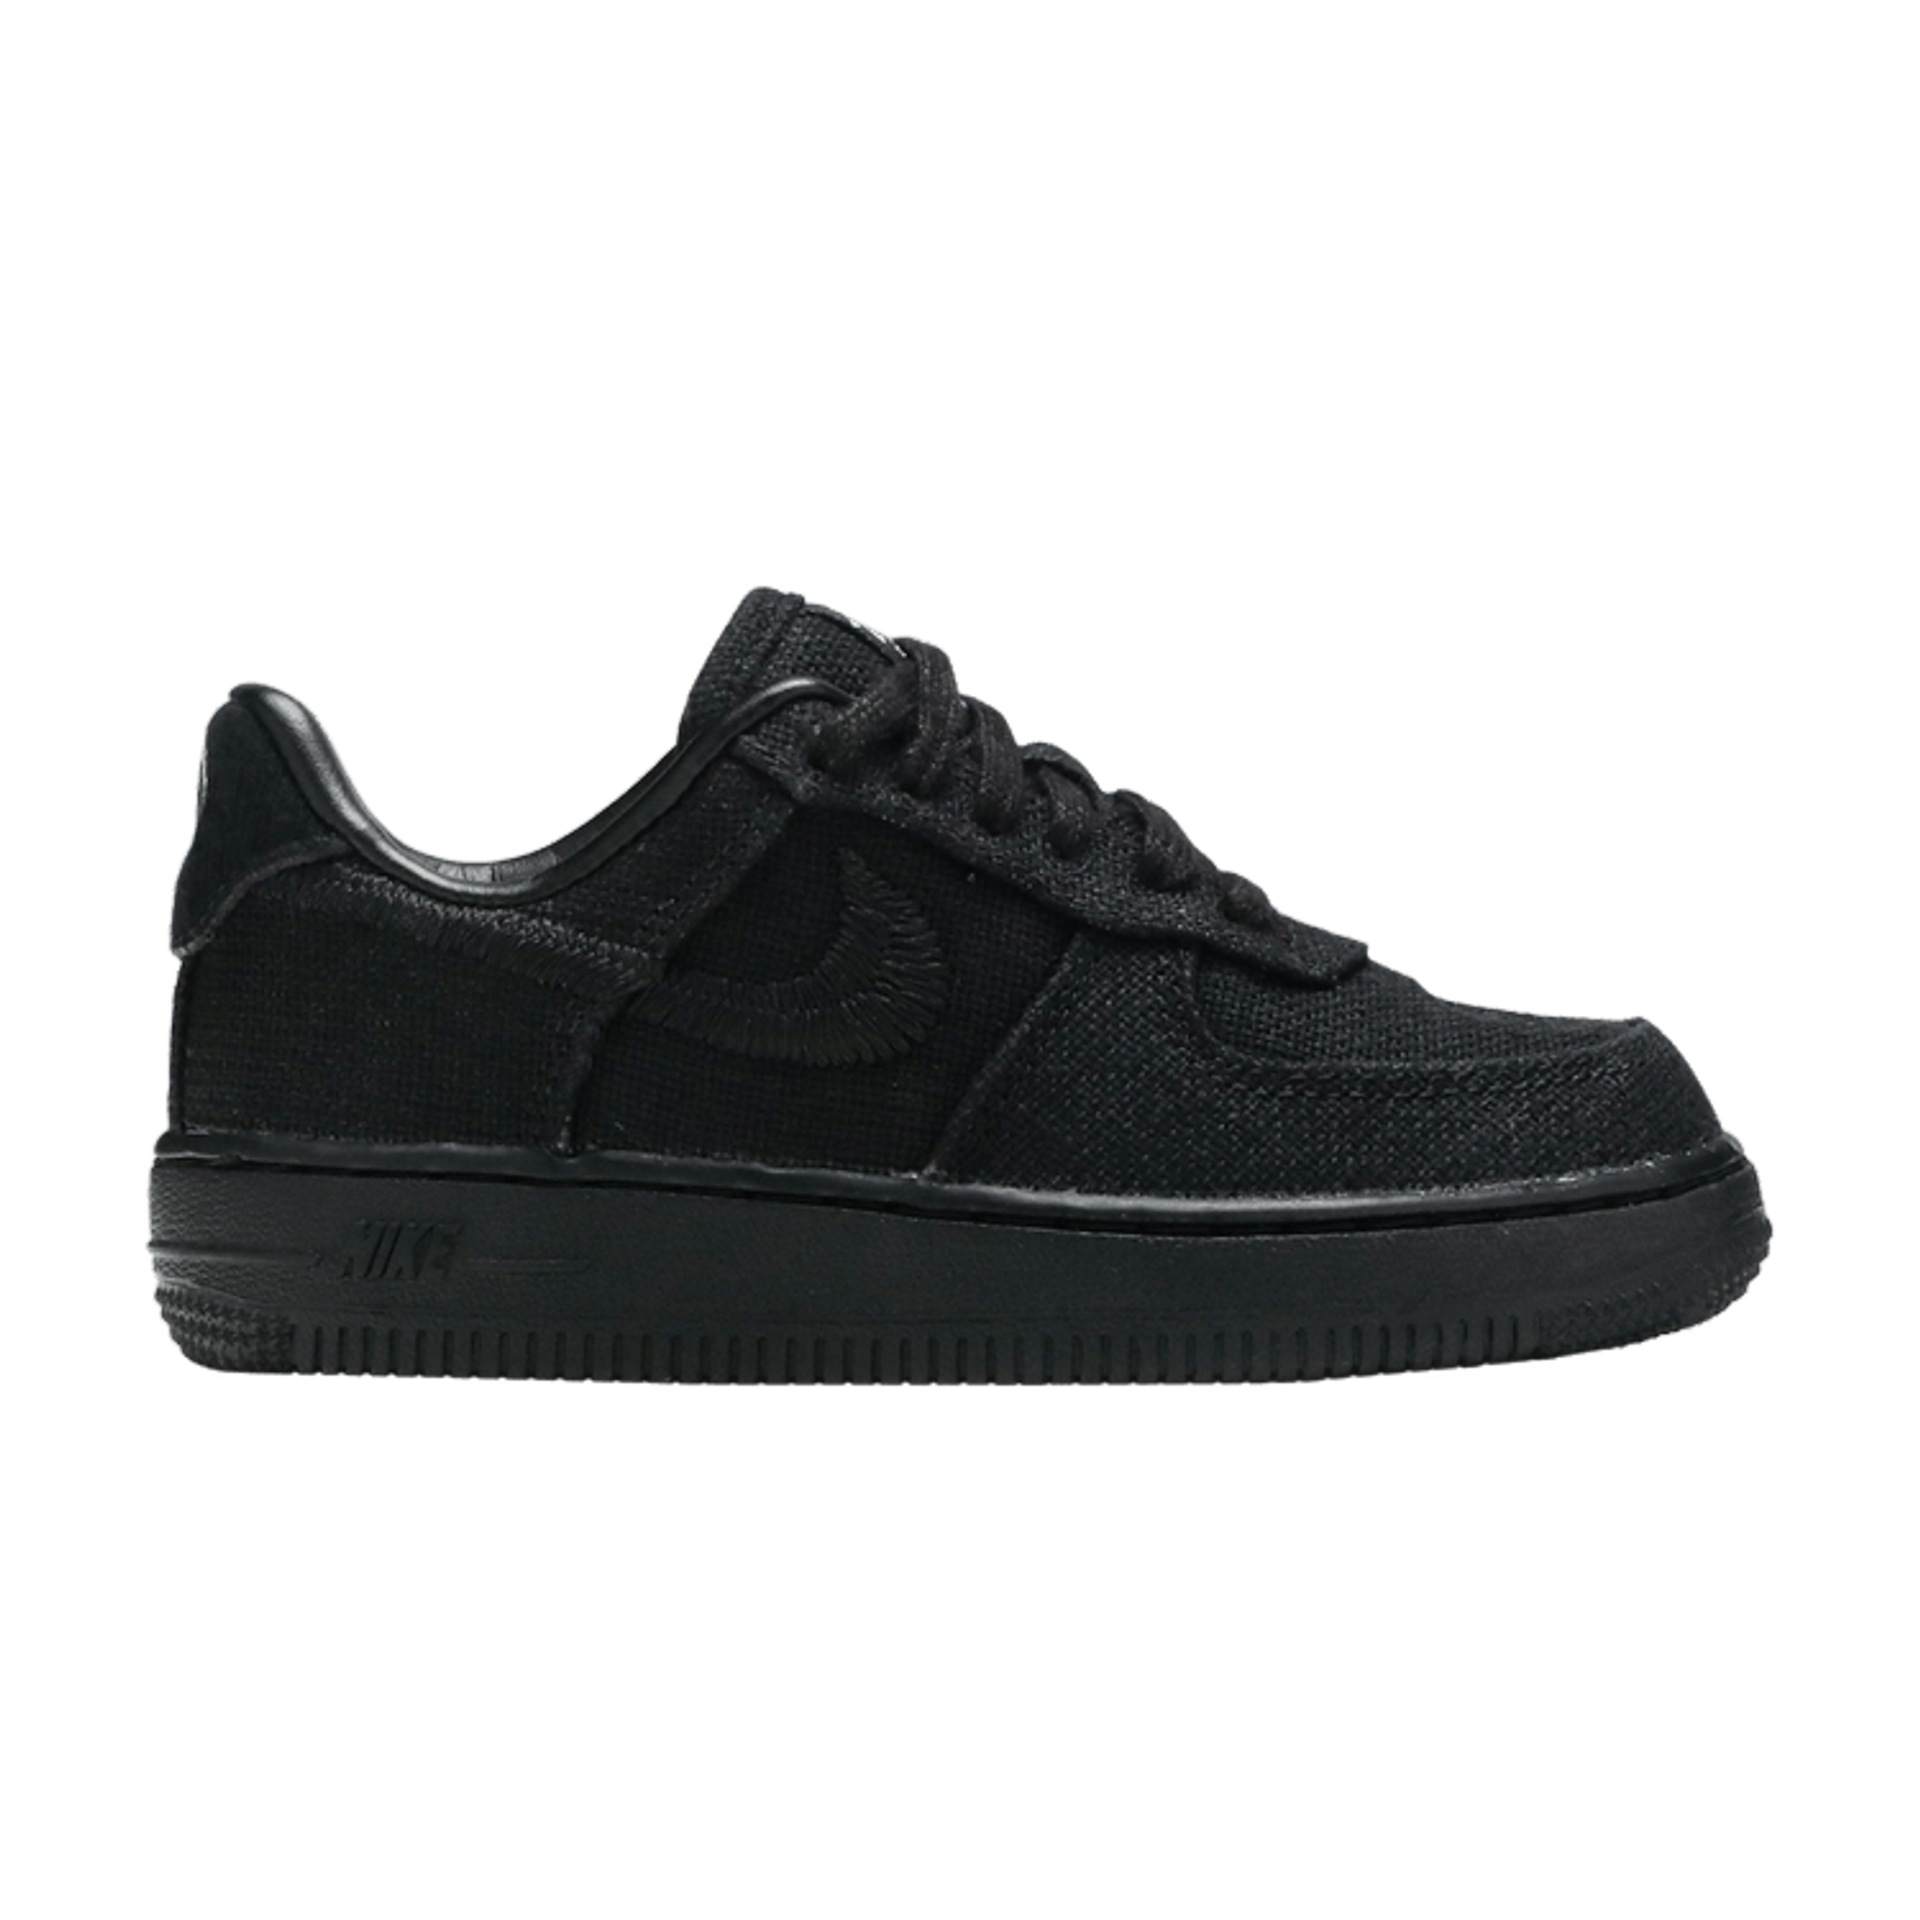 Stussy x Air Force 1 Low PS 'Black'